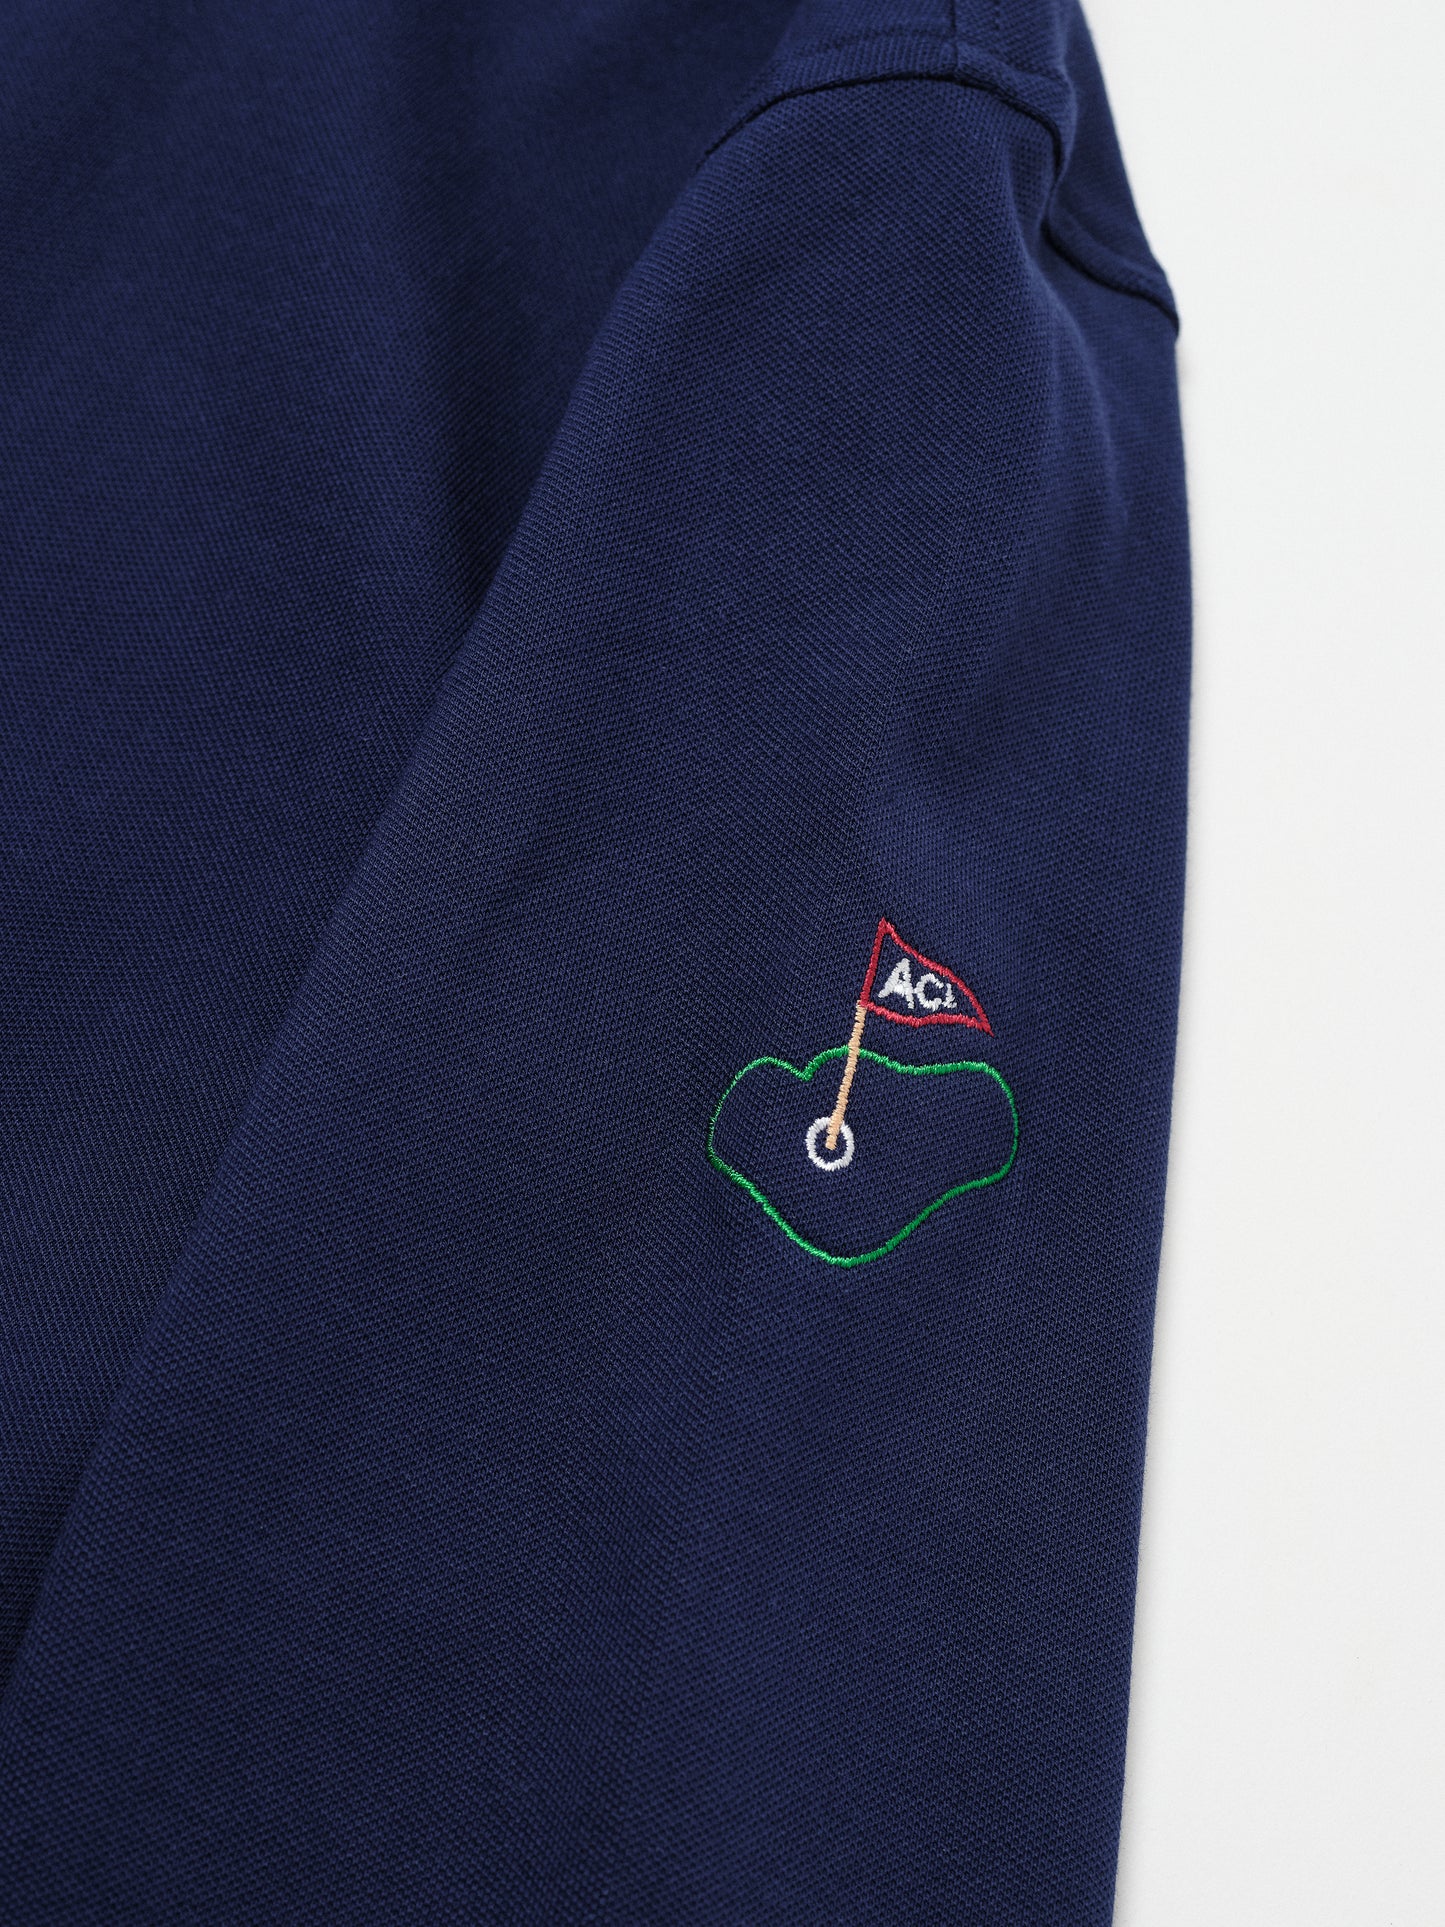 Holderness & Bourne Long Sleeve Pique Polo Shirt in Navy